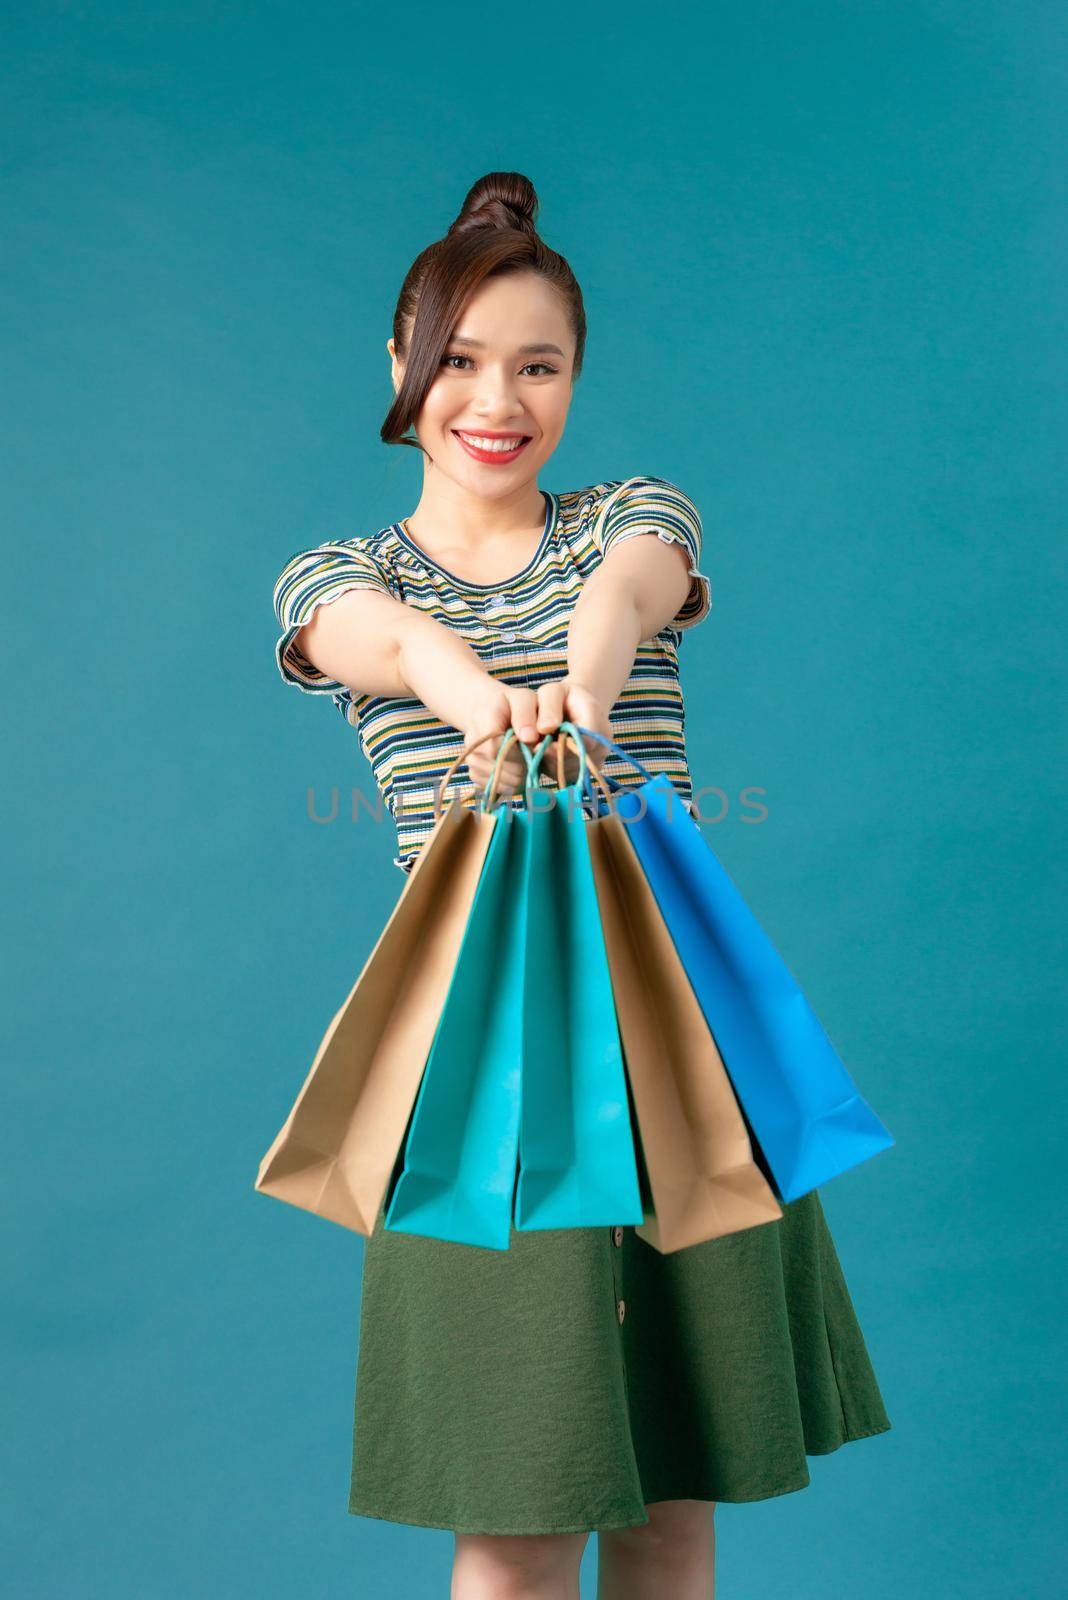 Woman with colored shopping bag